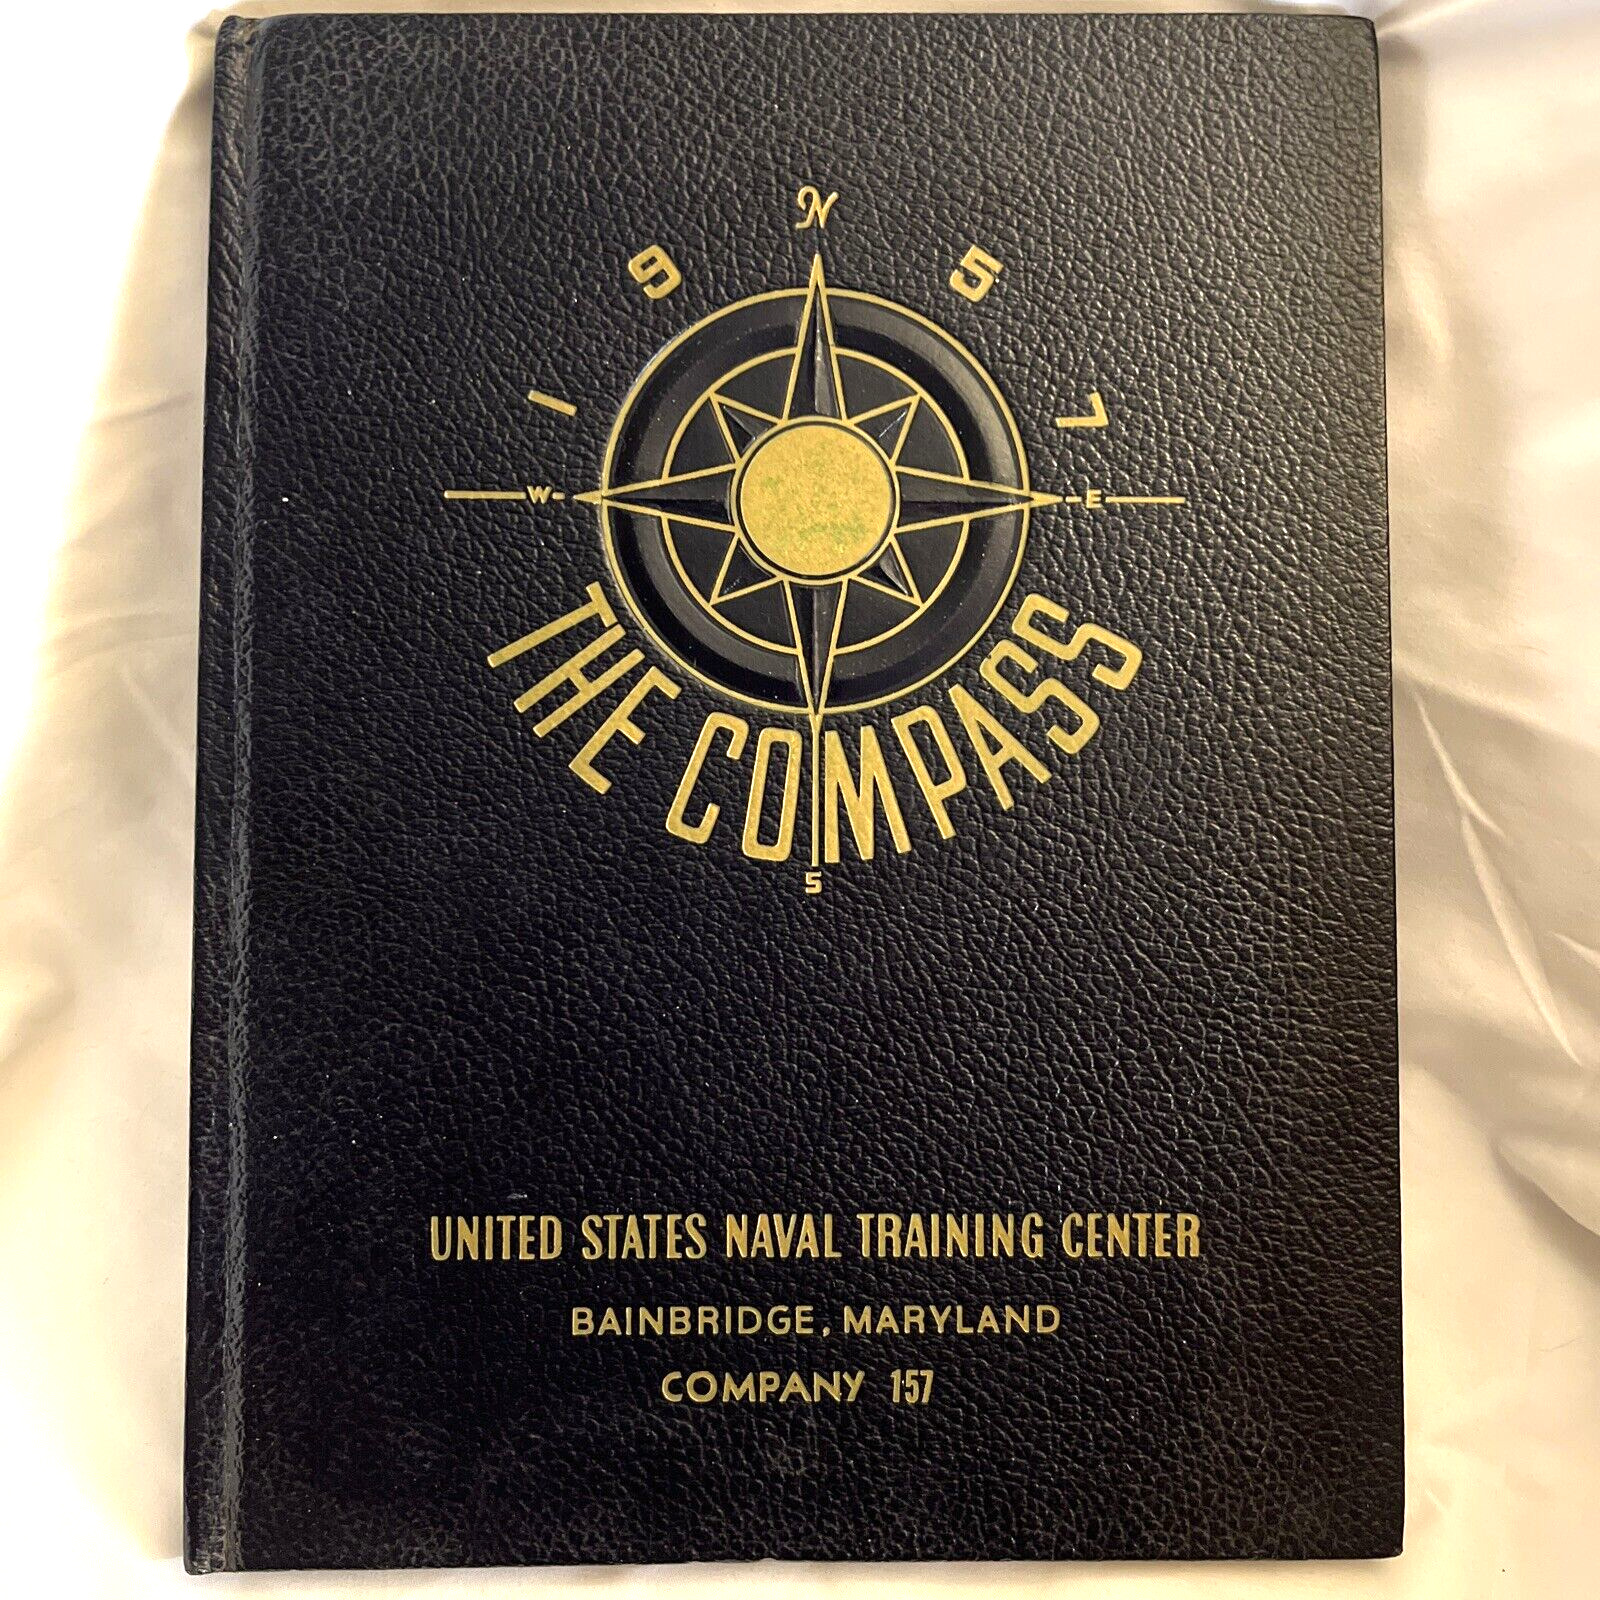 US Naval Training Center Yearbook 1957 Maryland The Compass Company 157